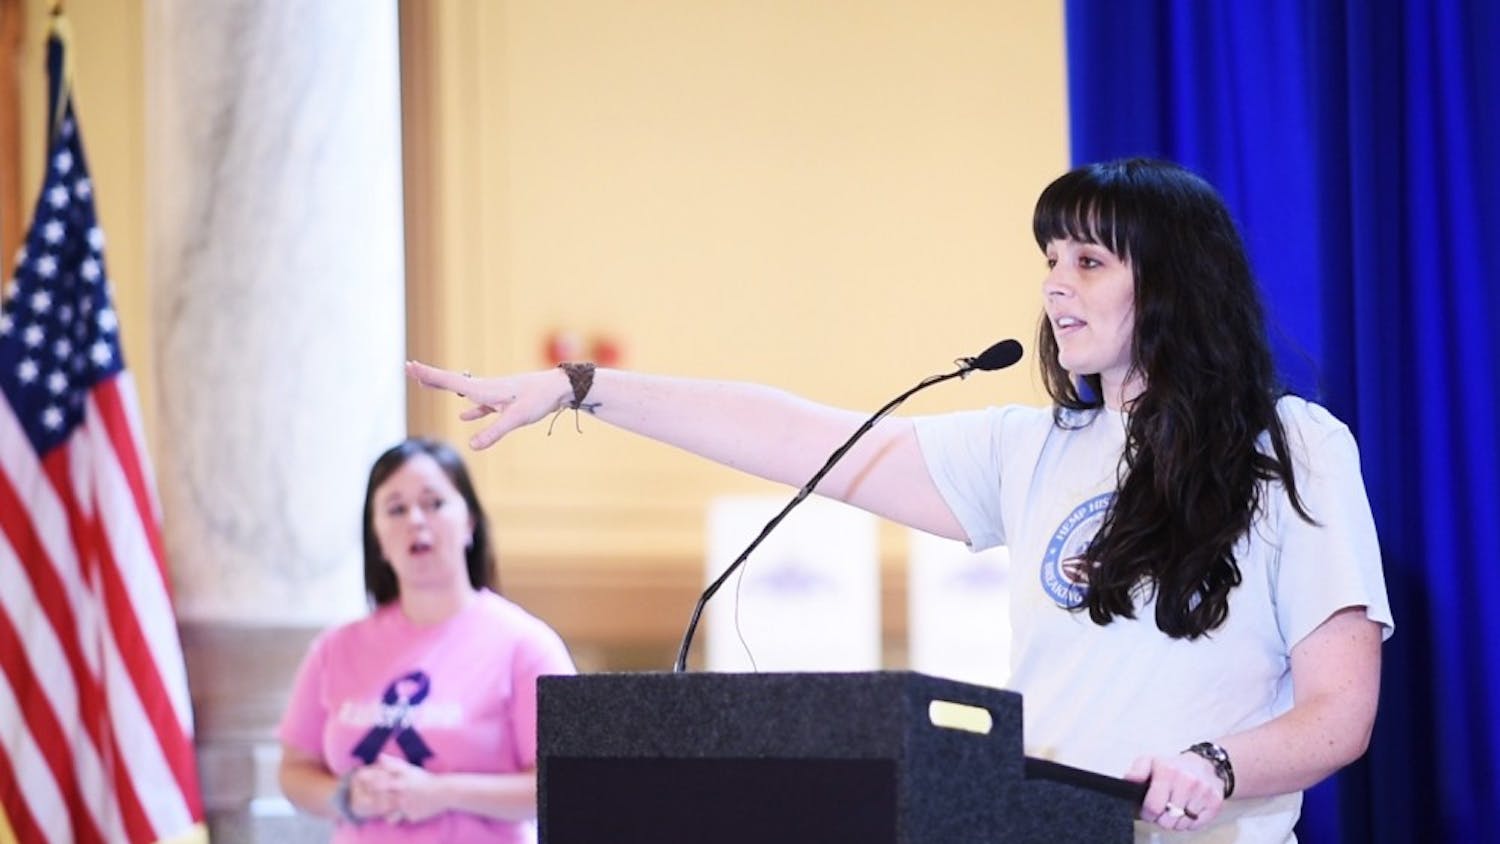 Michelle Lennis, a co-organizer of the Hoosiers for CBD Rally, speaks on Thursday at the Indiana Statehouse about the need for awareness about CBD oil. CBD oil and industrial hemp are the focus of three ongoing bills in the Indiana House of Representatives and Senate.